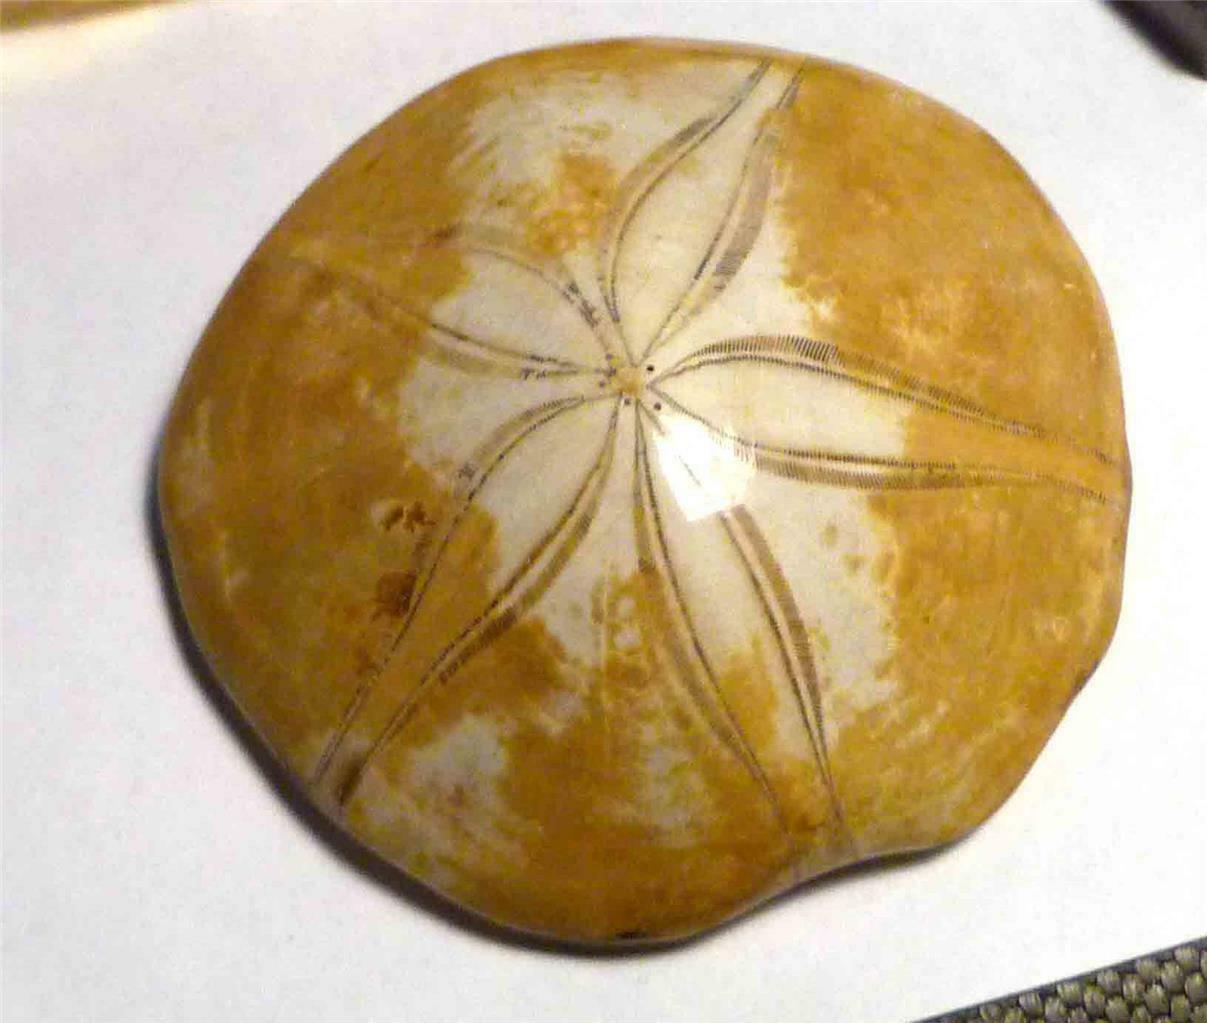 Excellent Clypeasteroid Fossil Excellent Star Polished Jewel Sand Dollar 2 3/4"